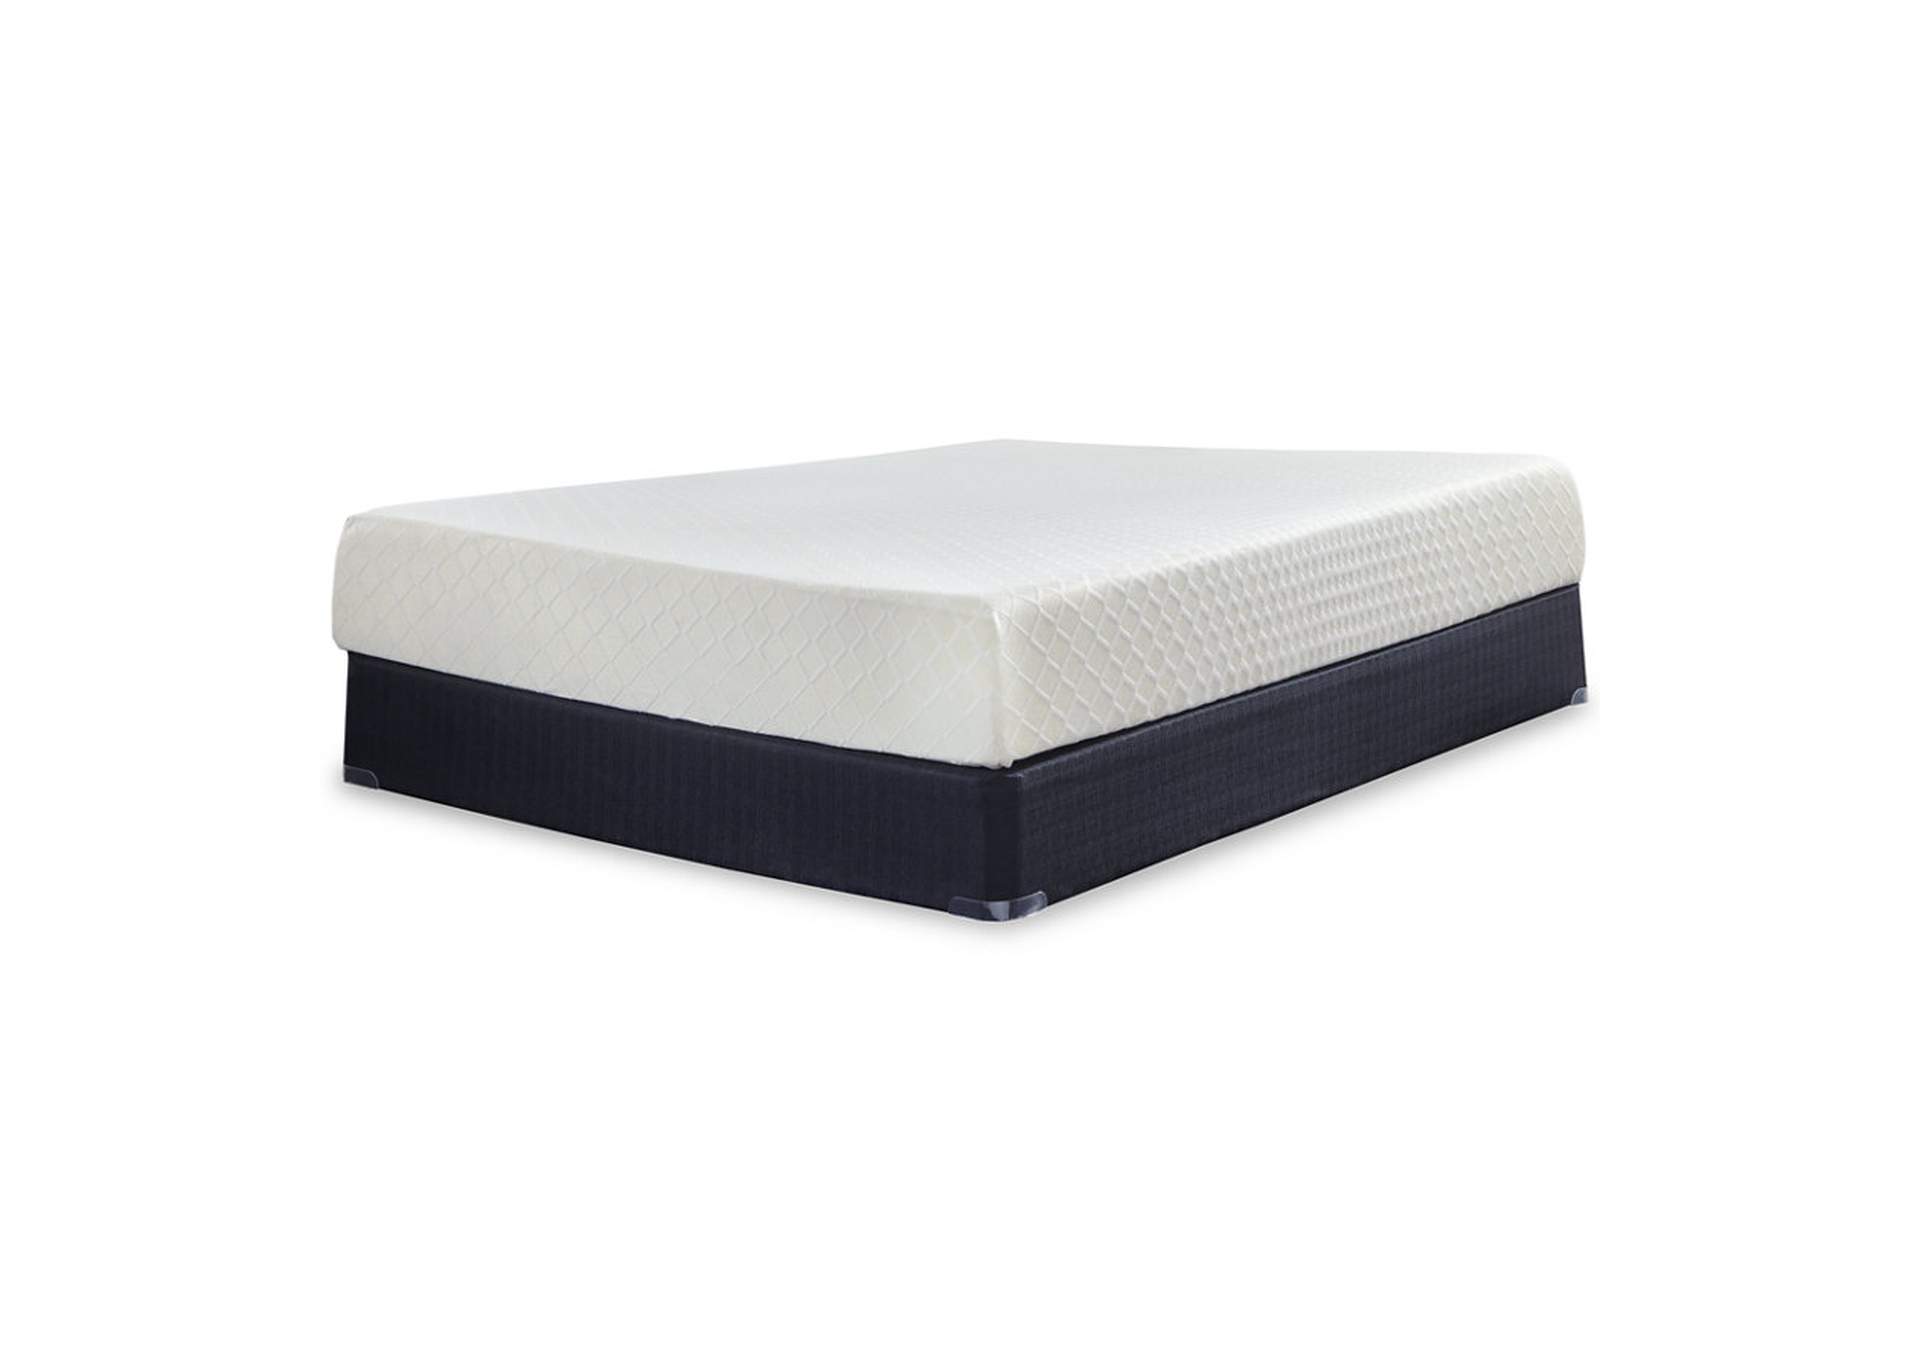 10 Inch Chime Memory Foam King Mattress in a Box,Direct To Consumer Express